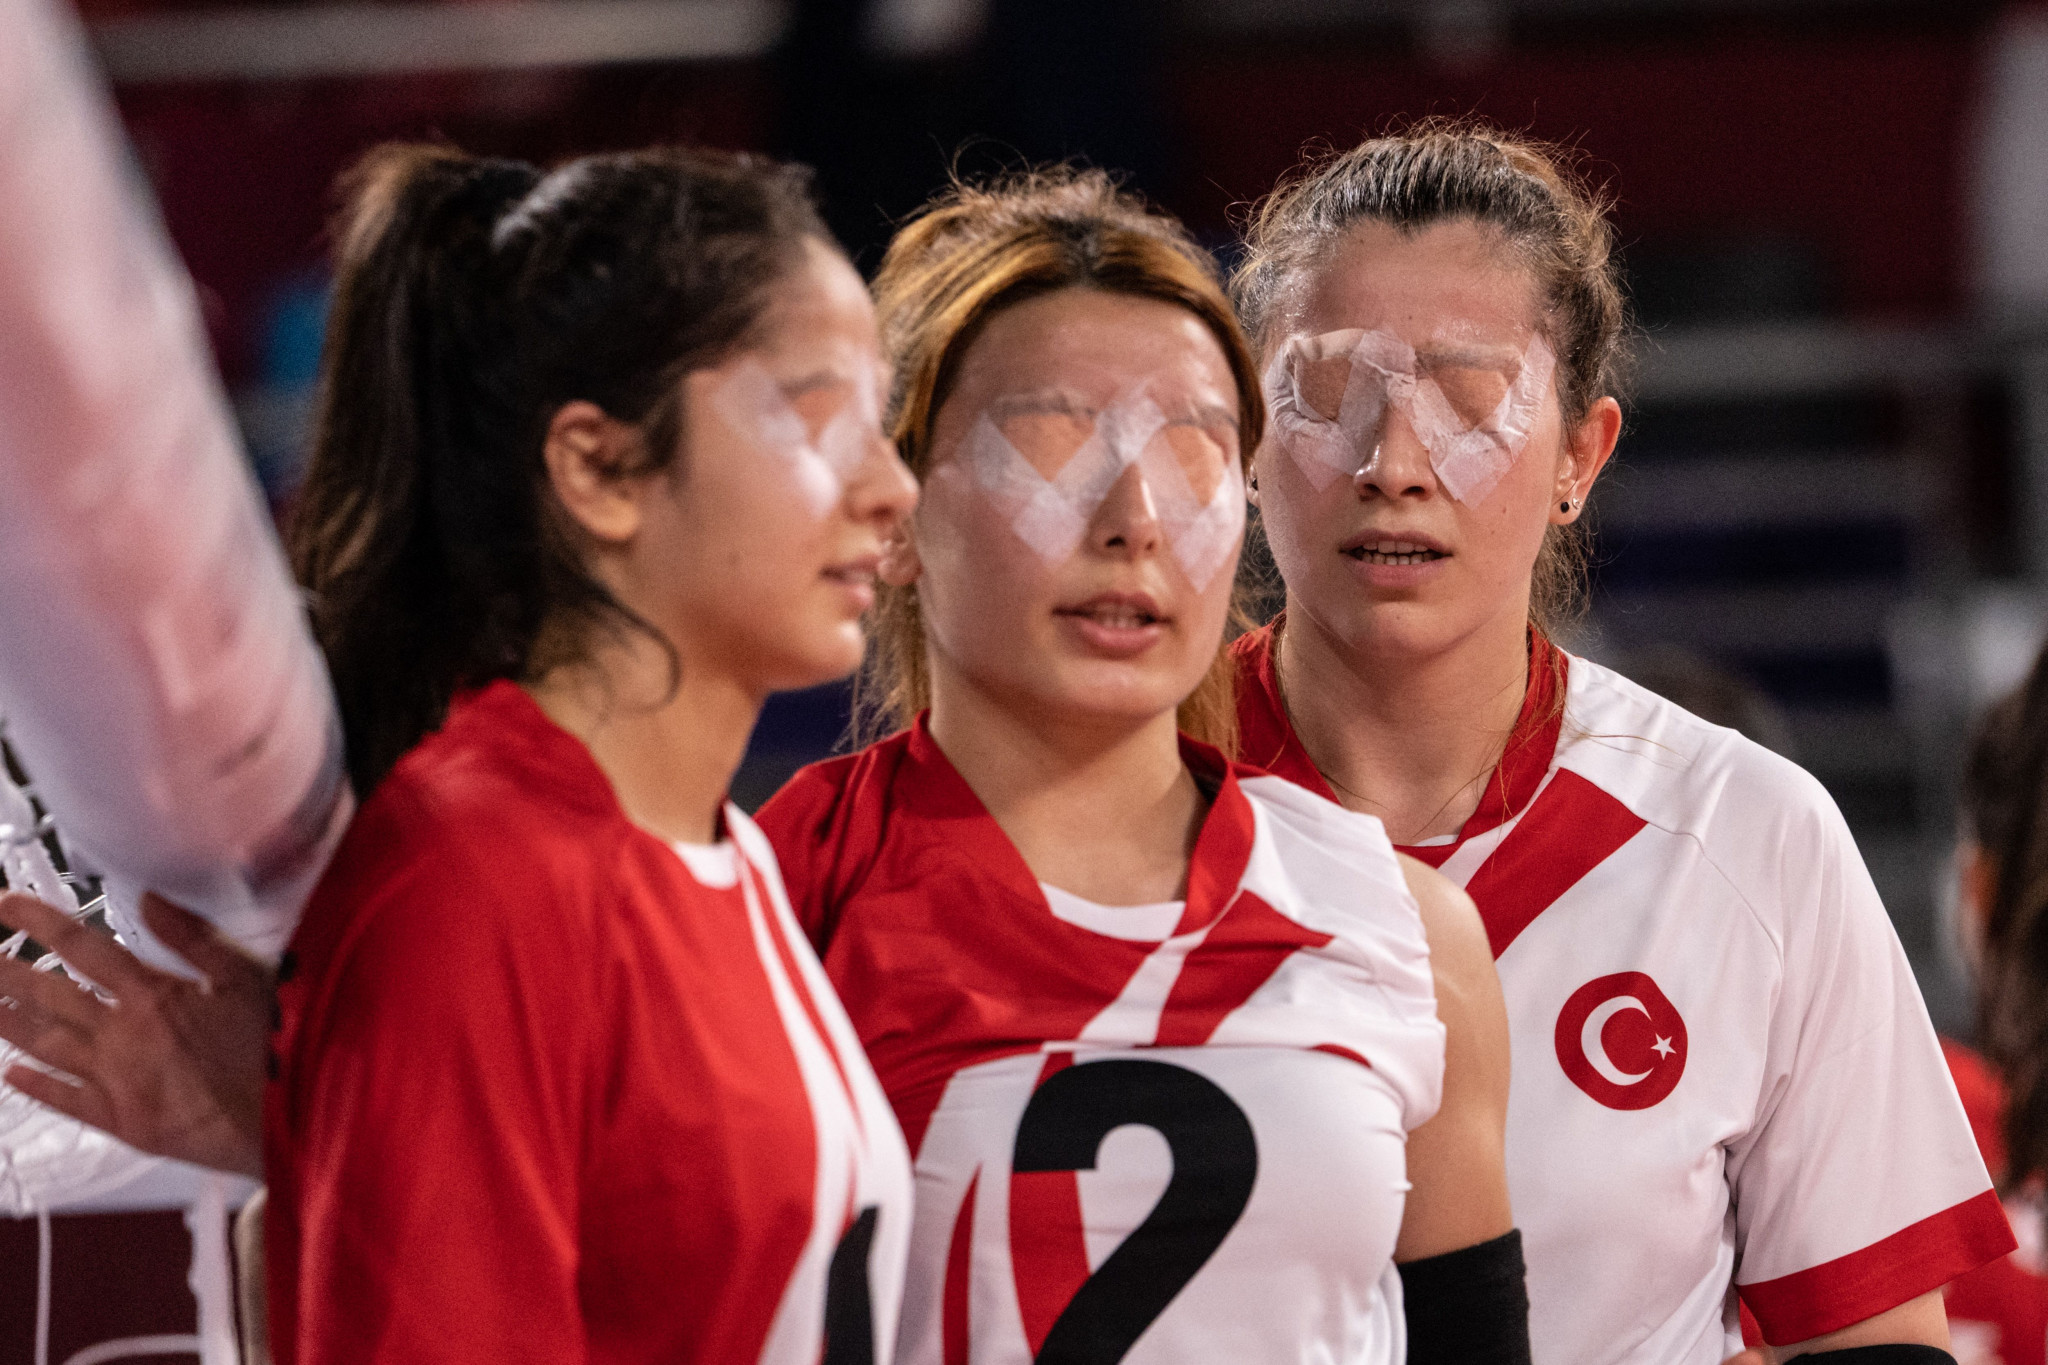 Turkey's men and women's sides both won at the IBSA Goalball European Championships A ©Getty Images